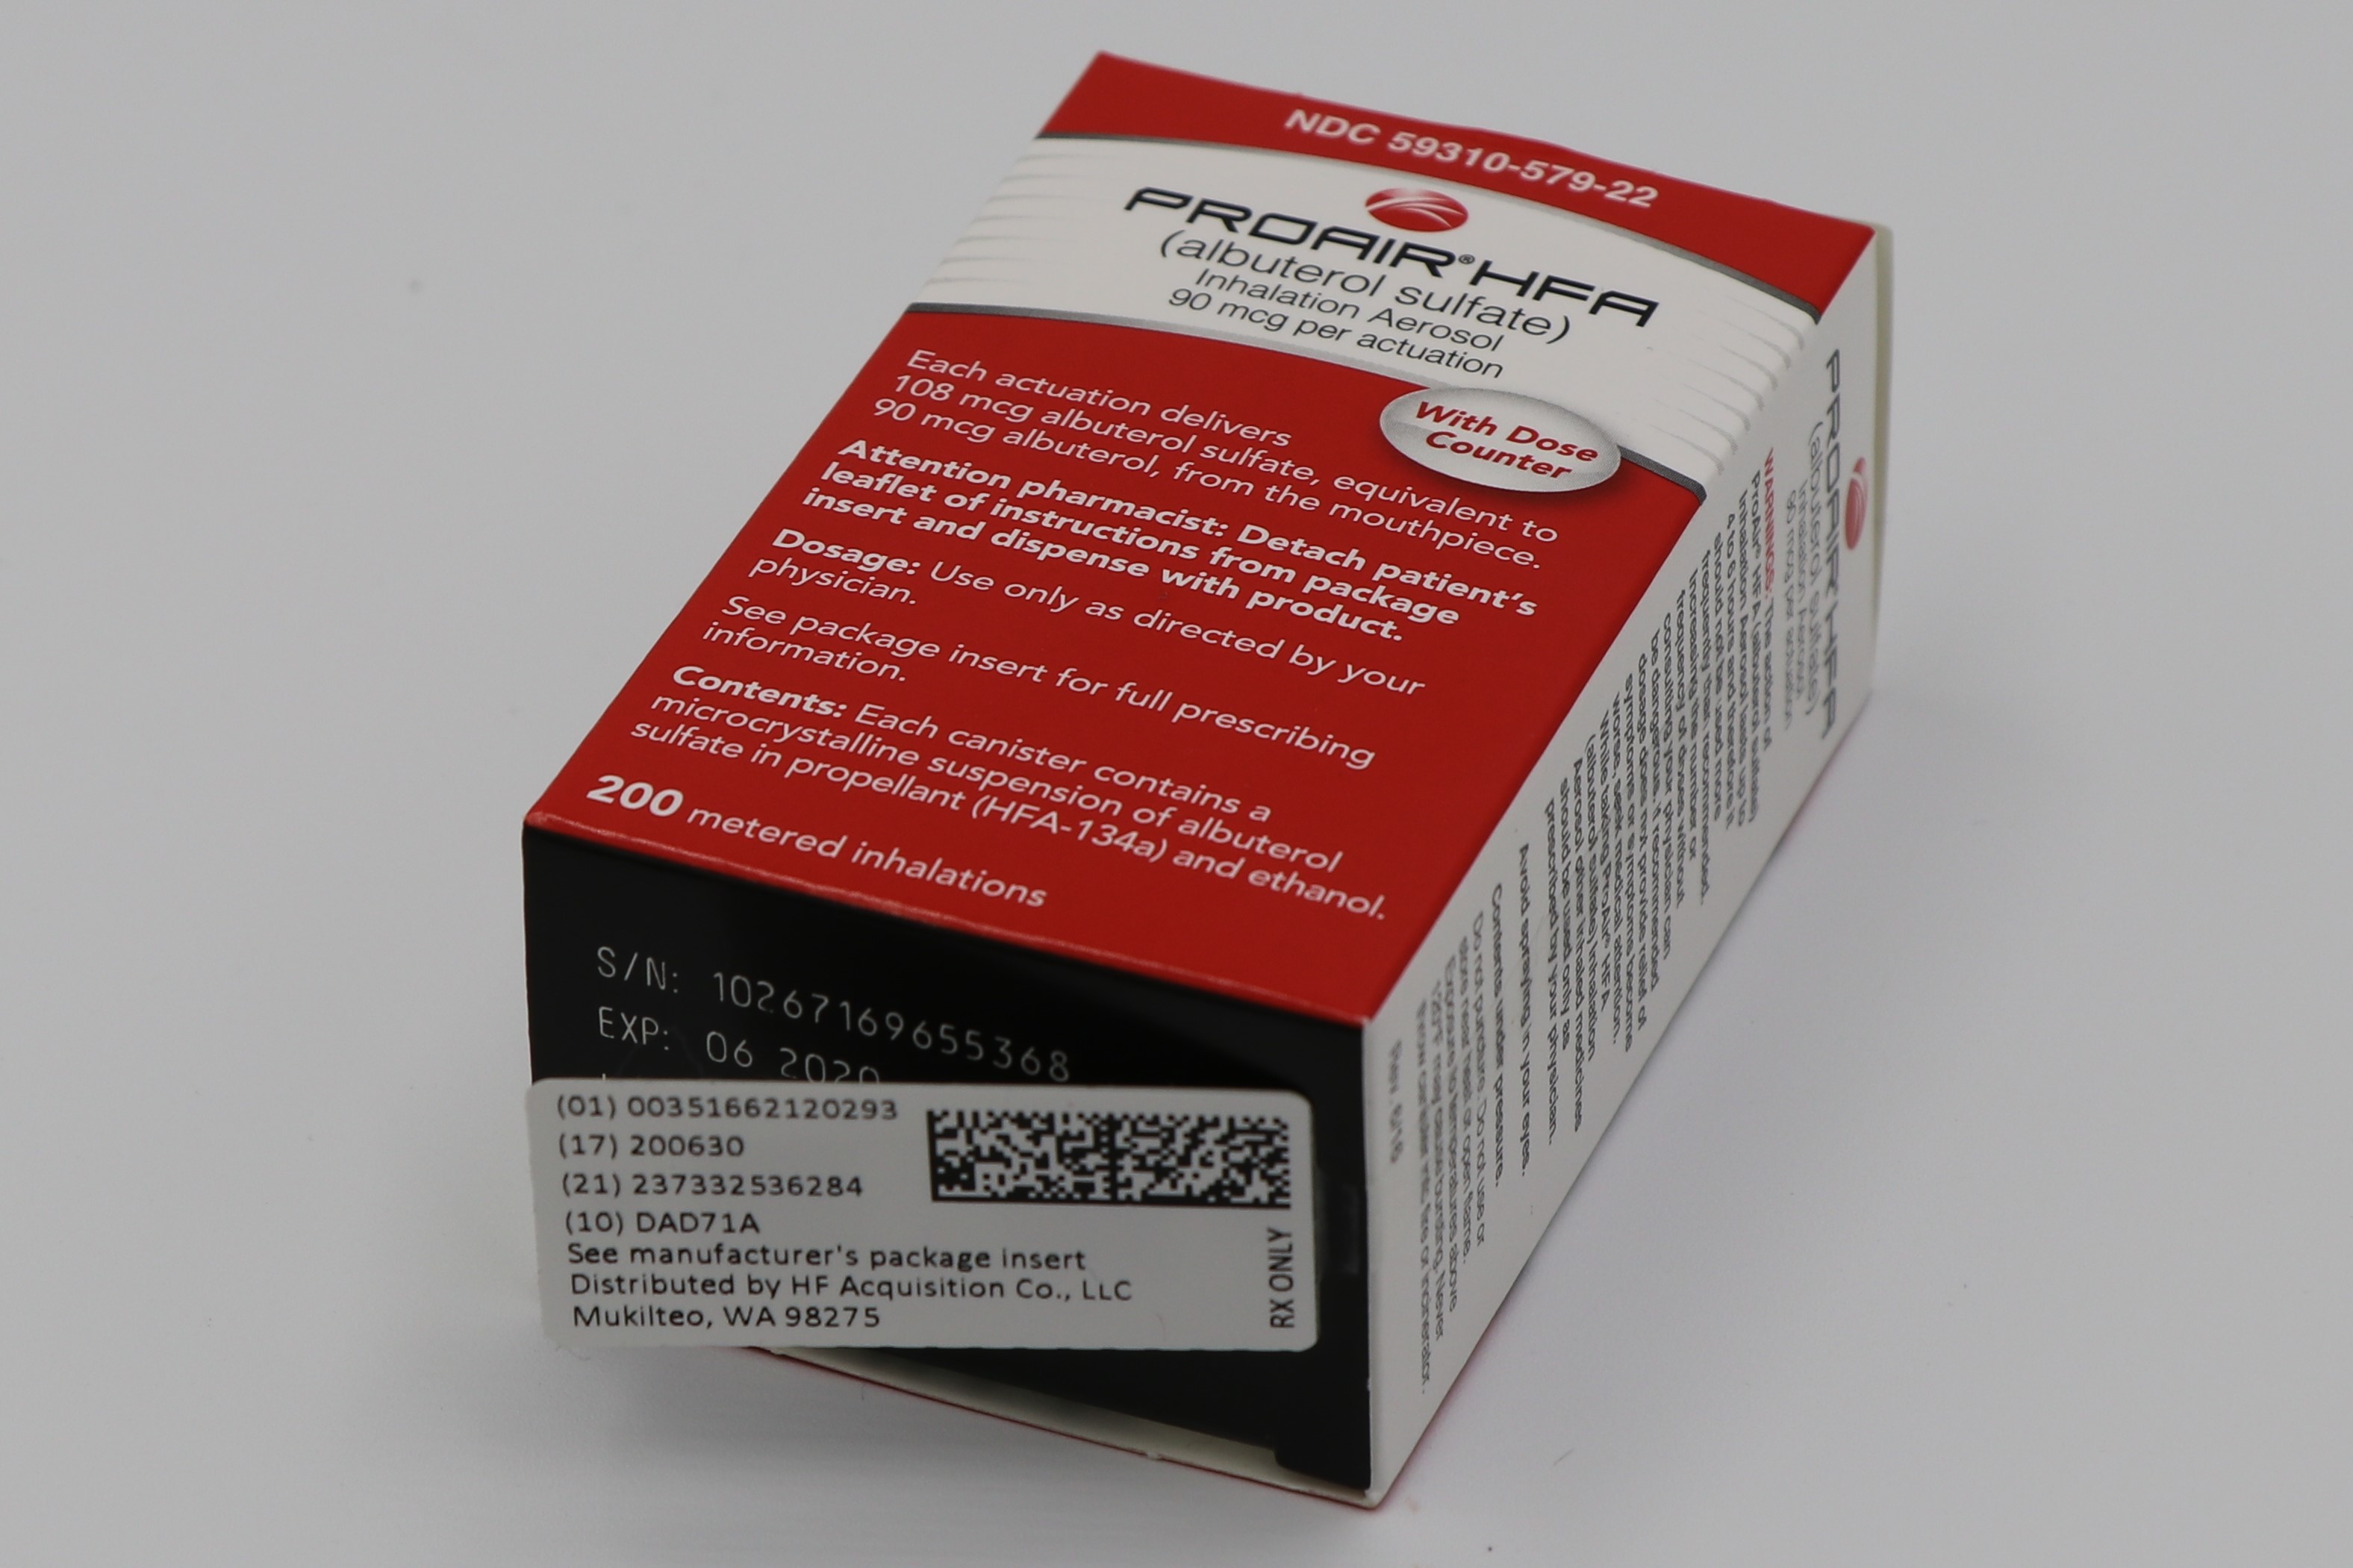 51662-1202-9 SERIALIZED LABELING